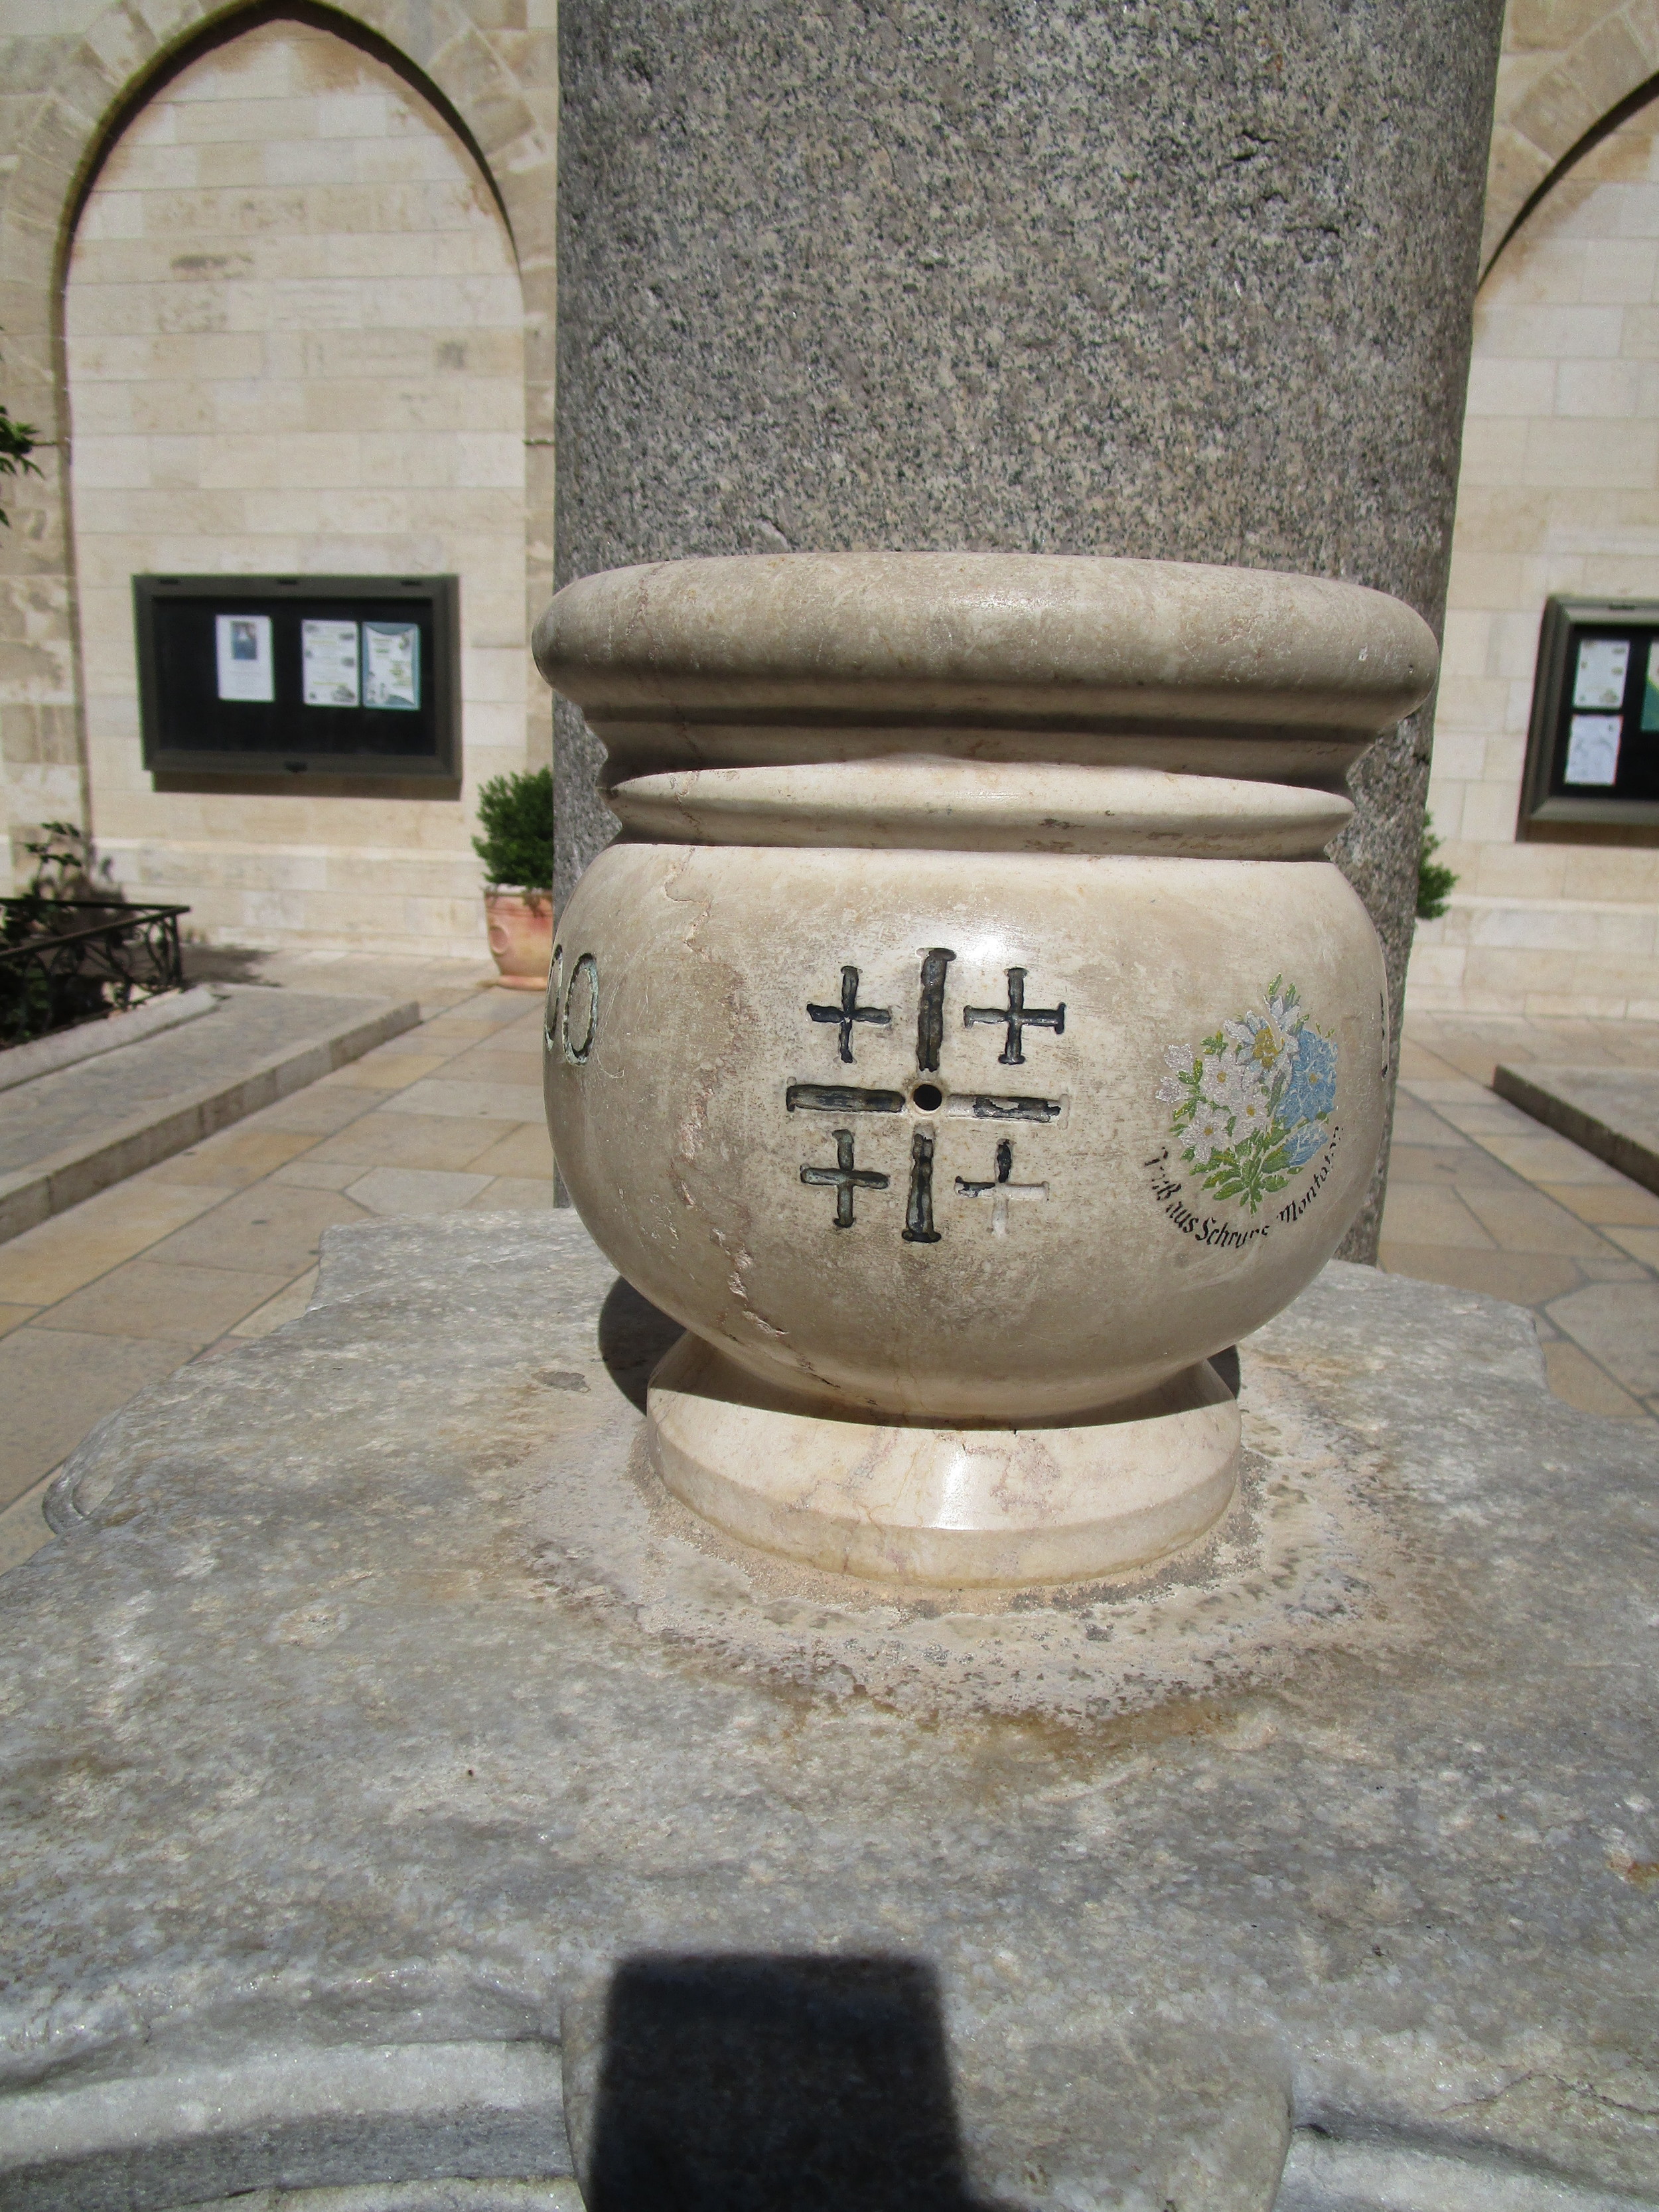  You'll notice this emblem often in these images. I've grown to love it. It's called The Jerusalem Cross. I will write about it in upcoming entries. 